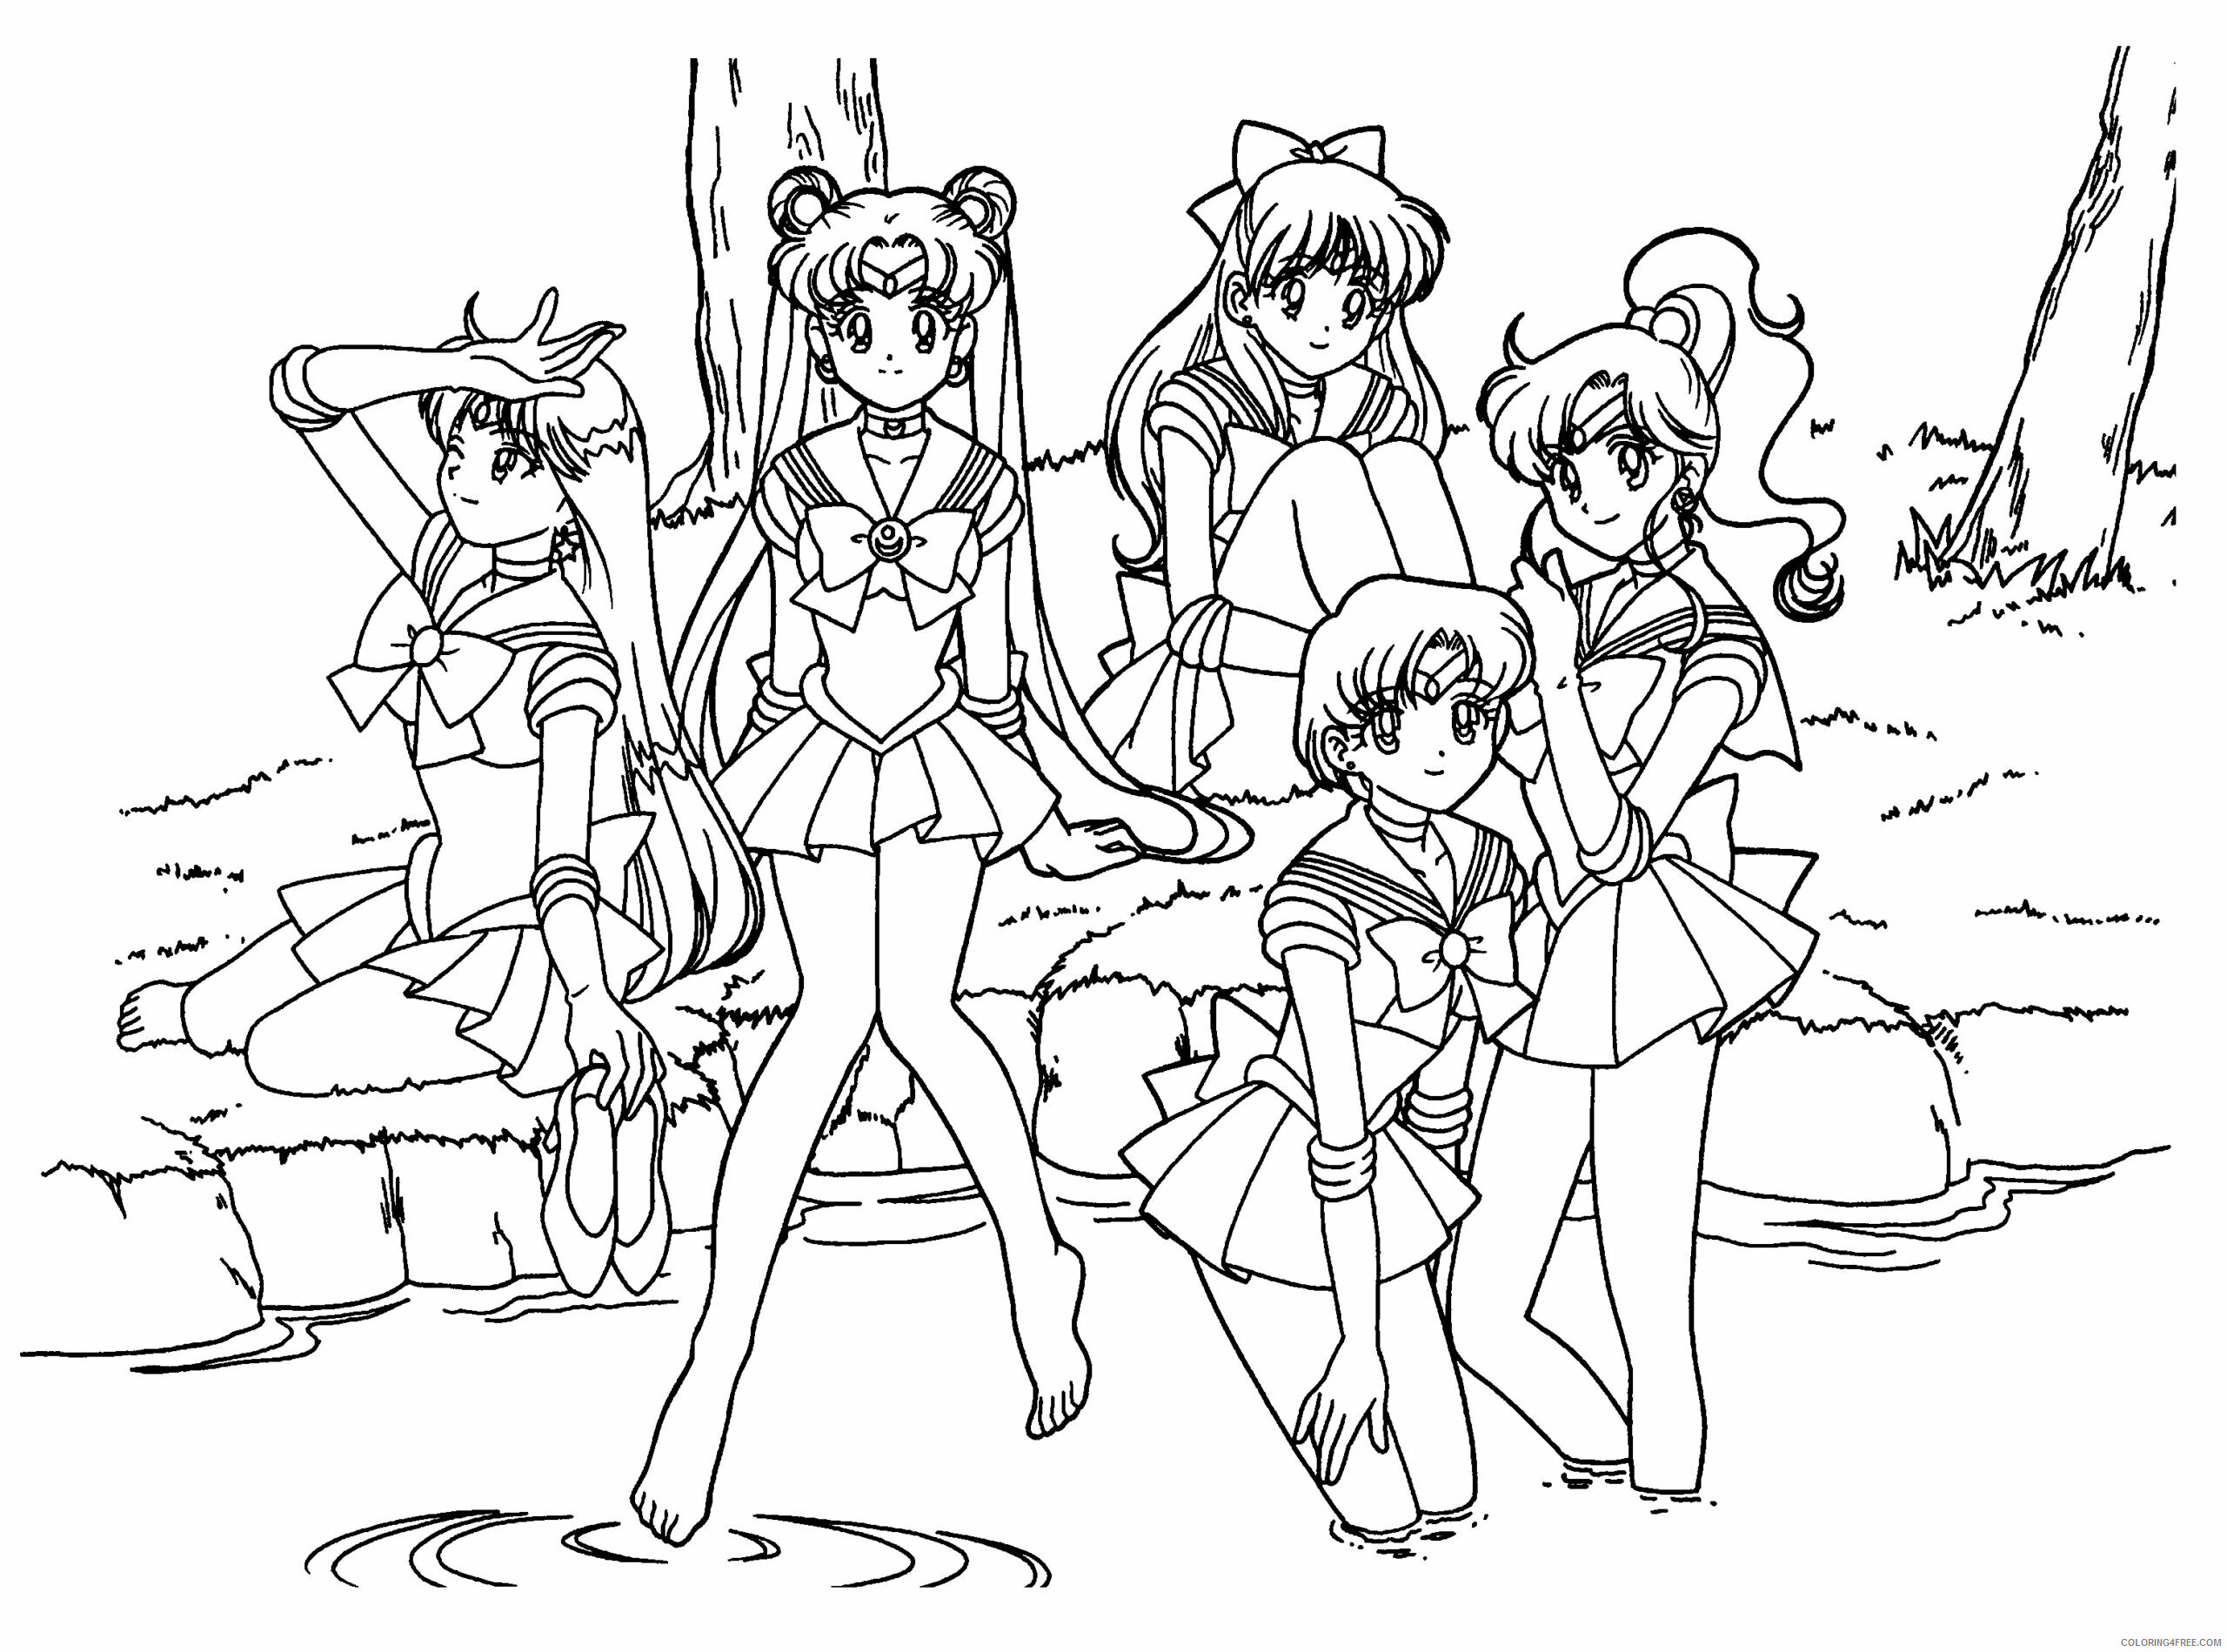 Sailor Moon Printable Coloring Pages Anime sailormoon PzUbA 2021 0993 Coloring4free